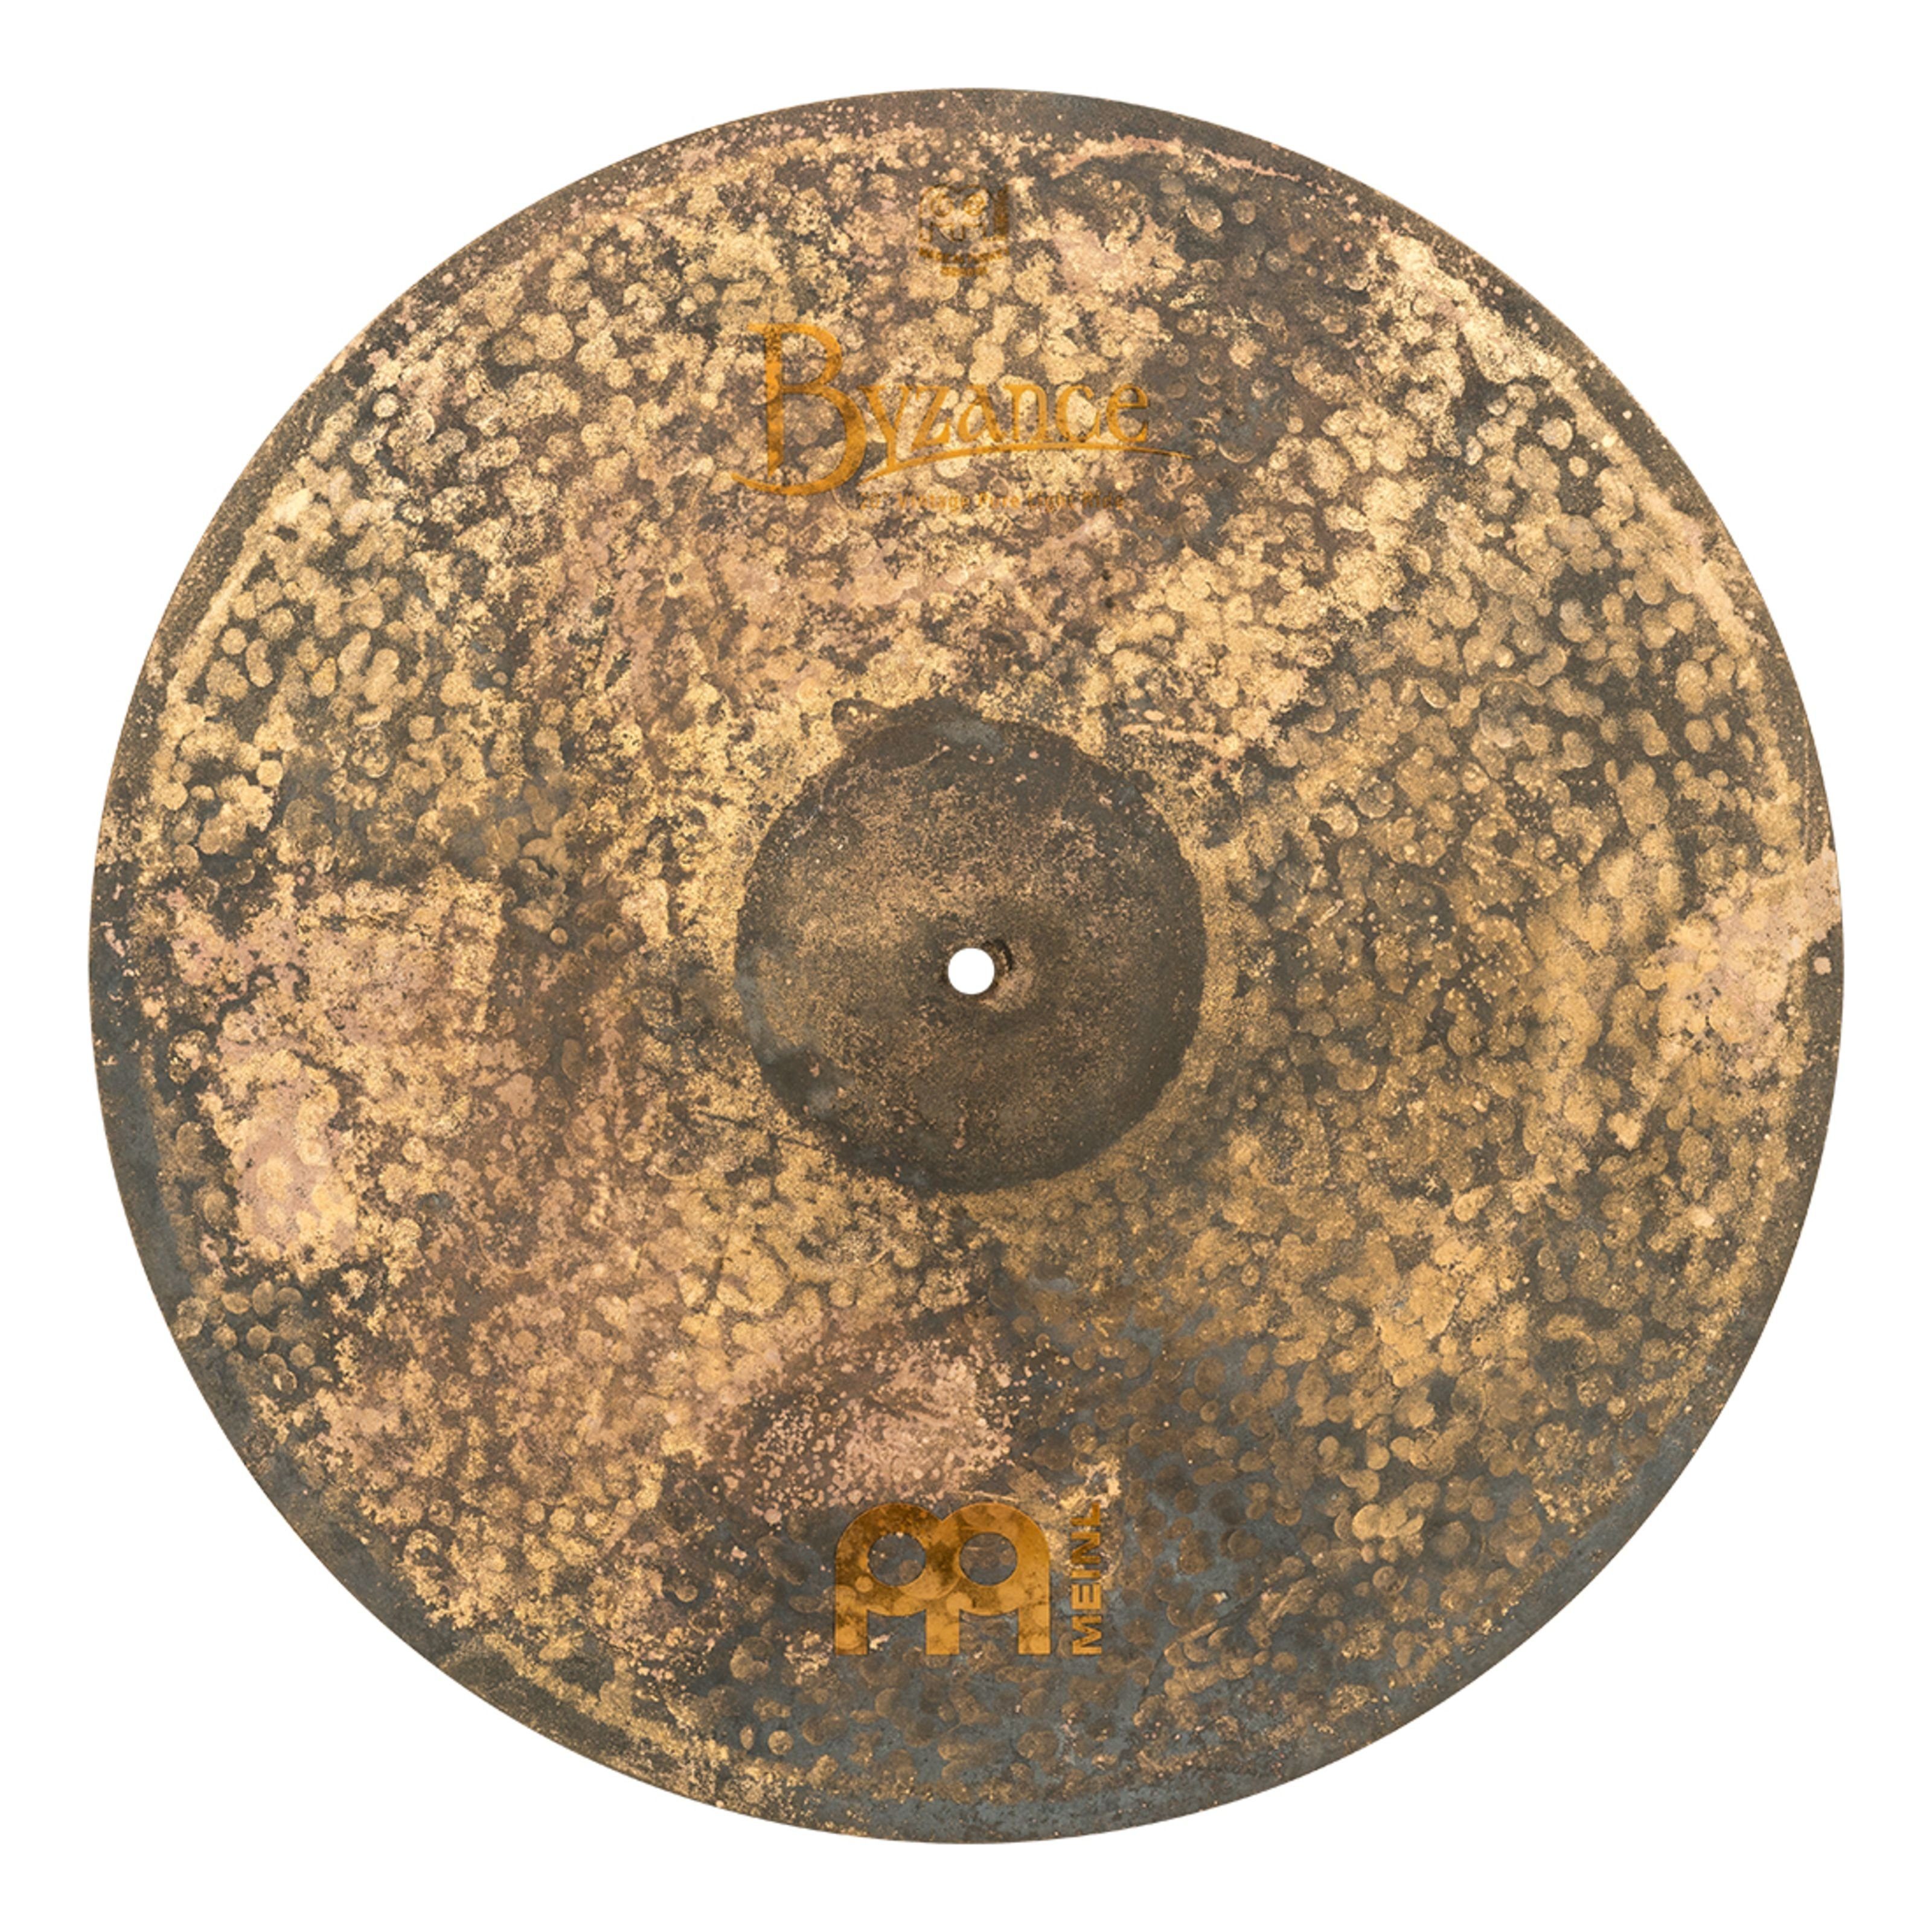 Meinl Percussion Spielzeug-Musikinstrument, Byzance Pure Light Ride 20", B20VPLR, Vintage - Ride Cymbal